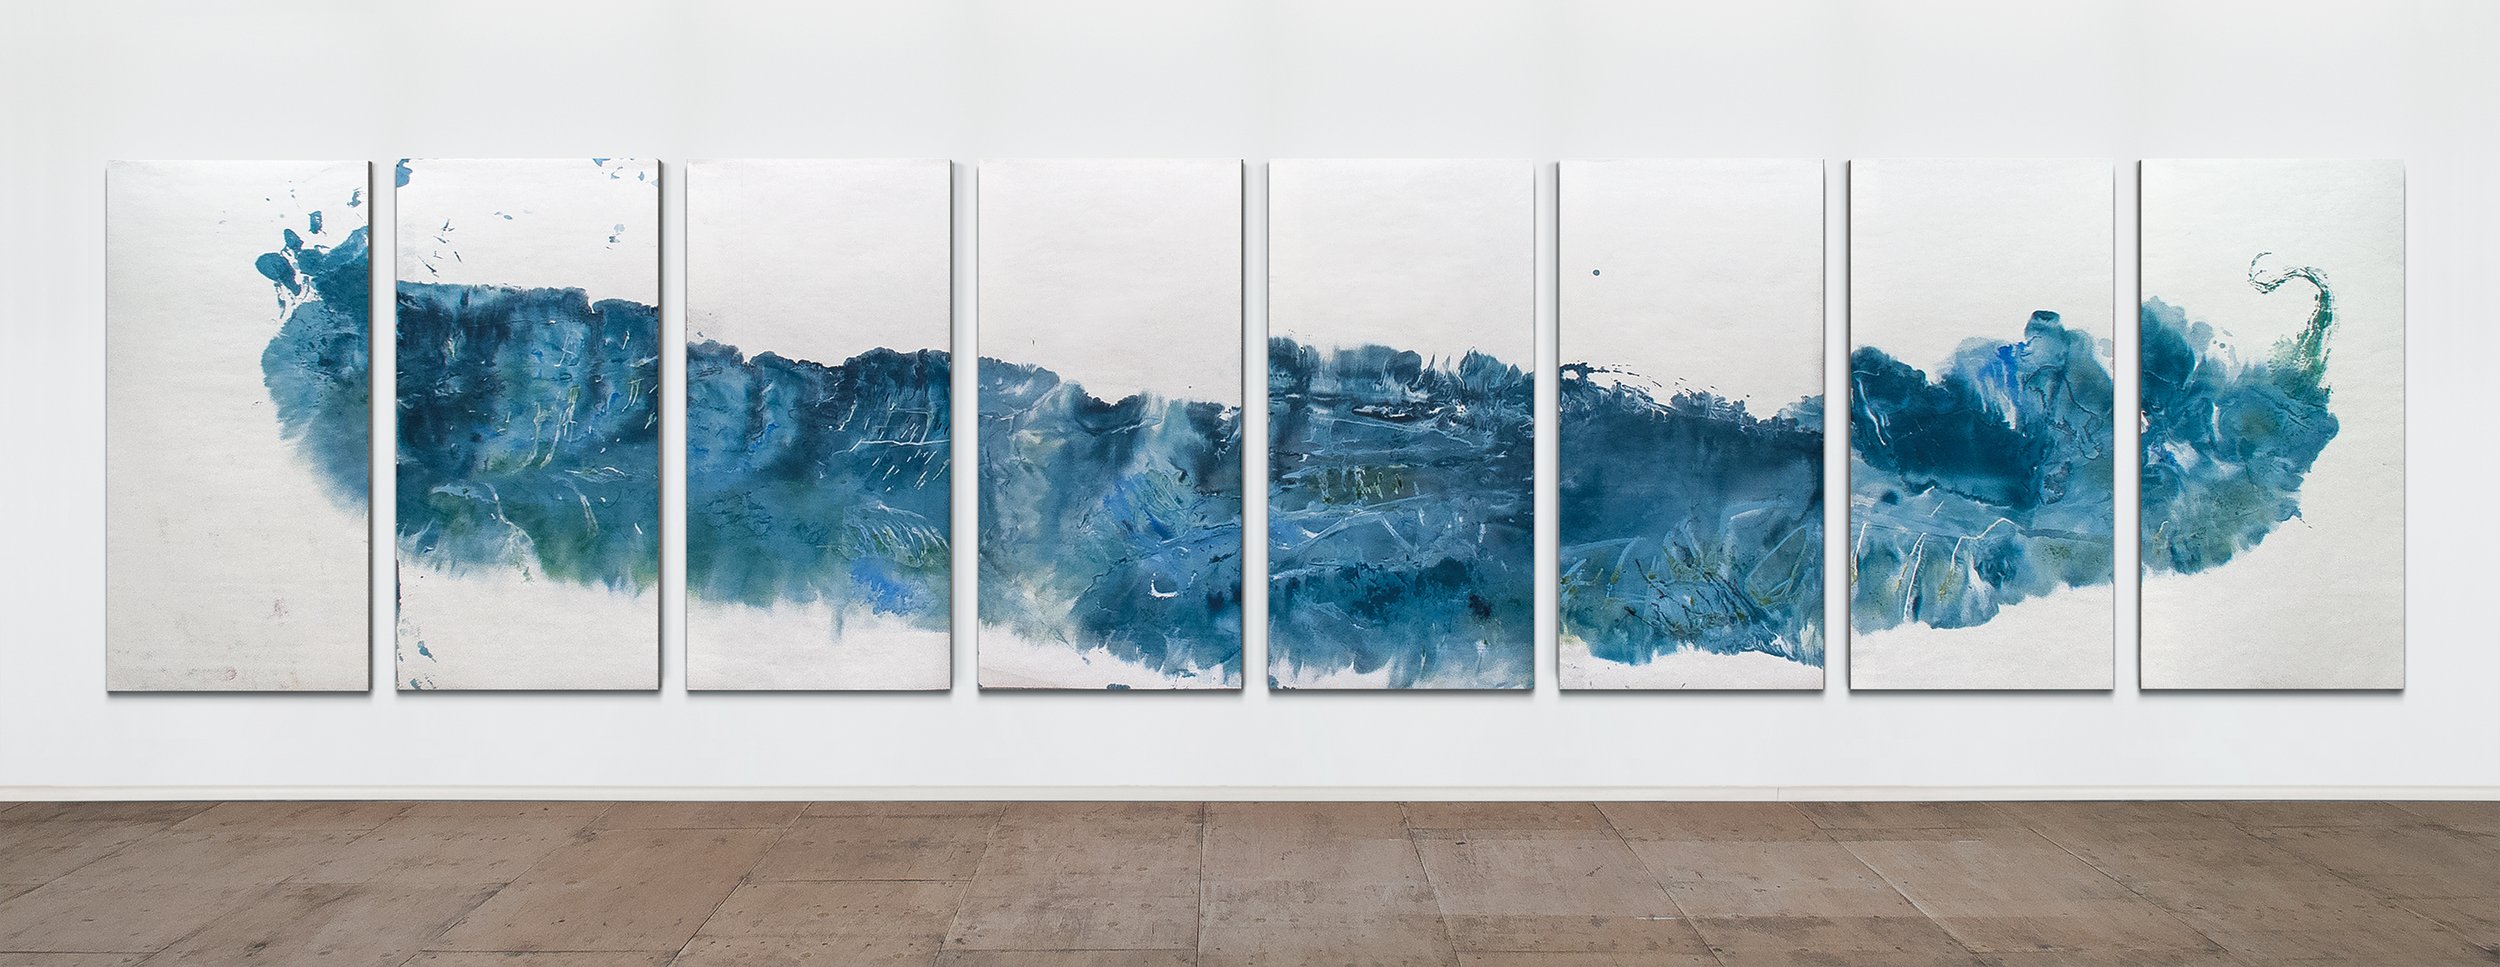  Azoth nebula, 2017 Polyptych of 8 panels, 195 x 95 cm each Ink and pigments on Xuan paper mounted on canvas  